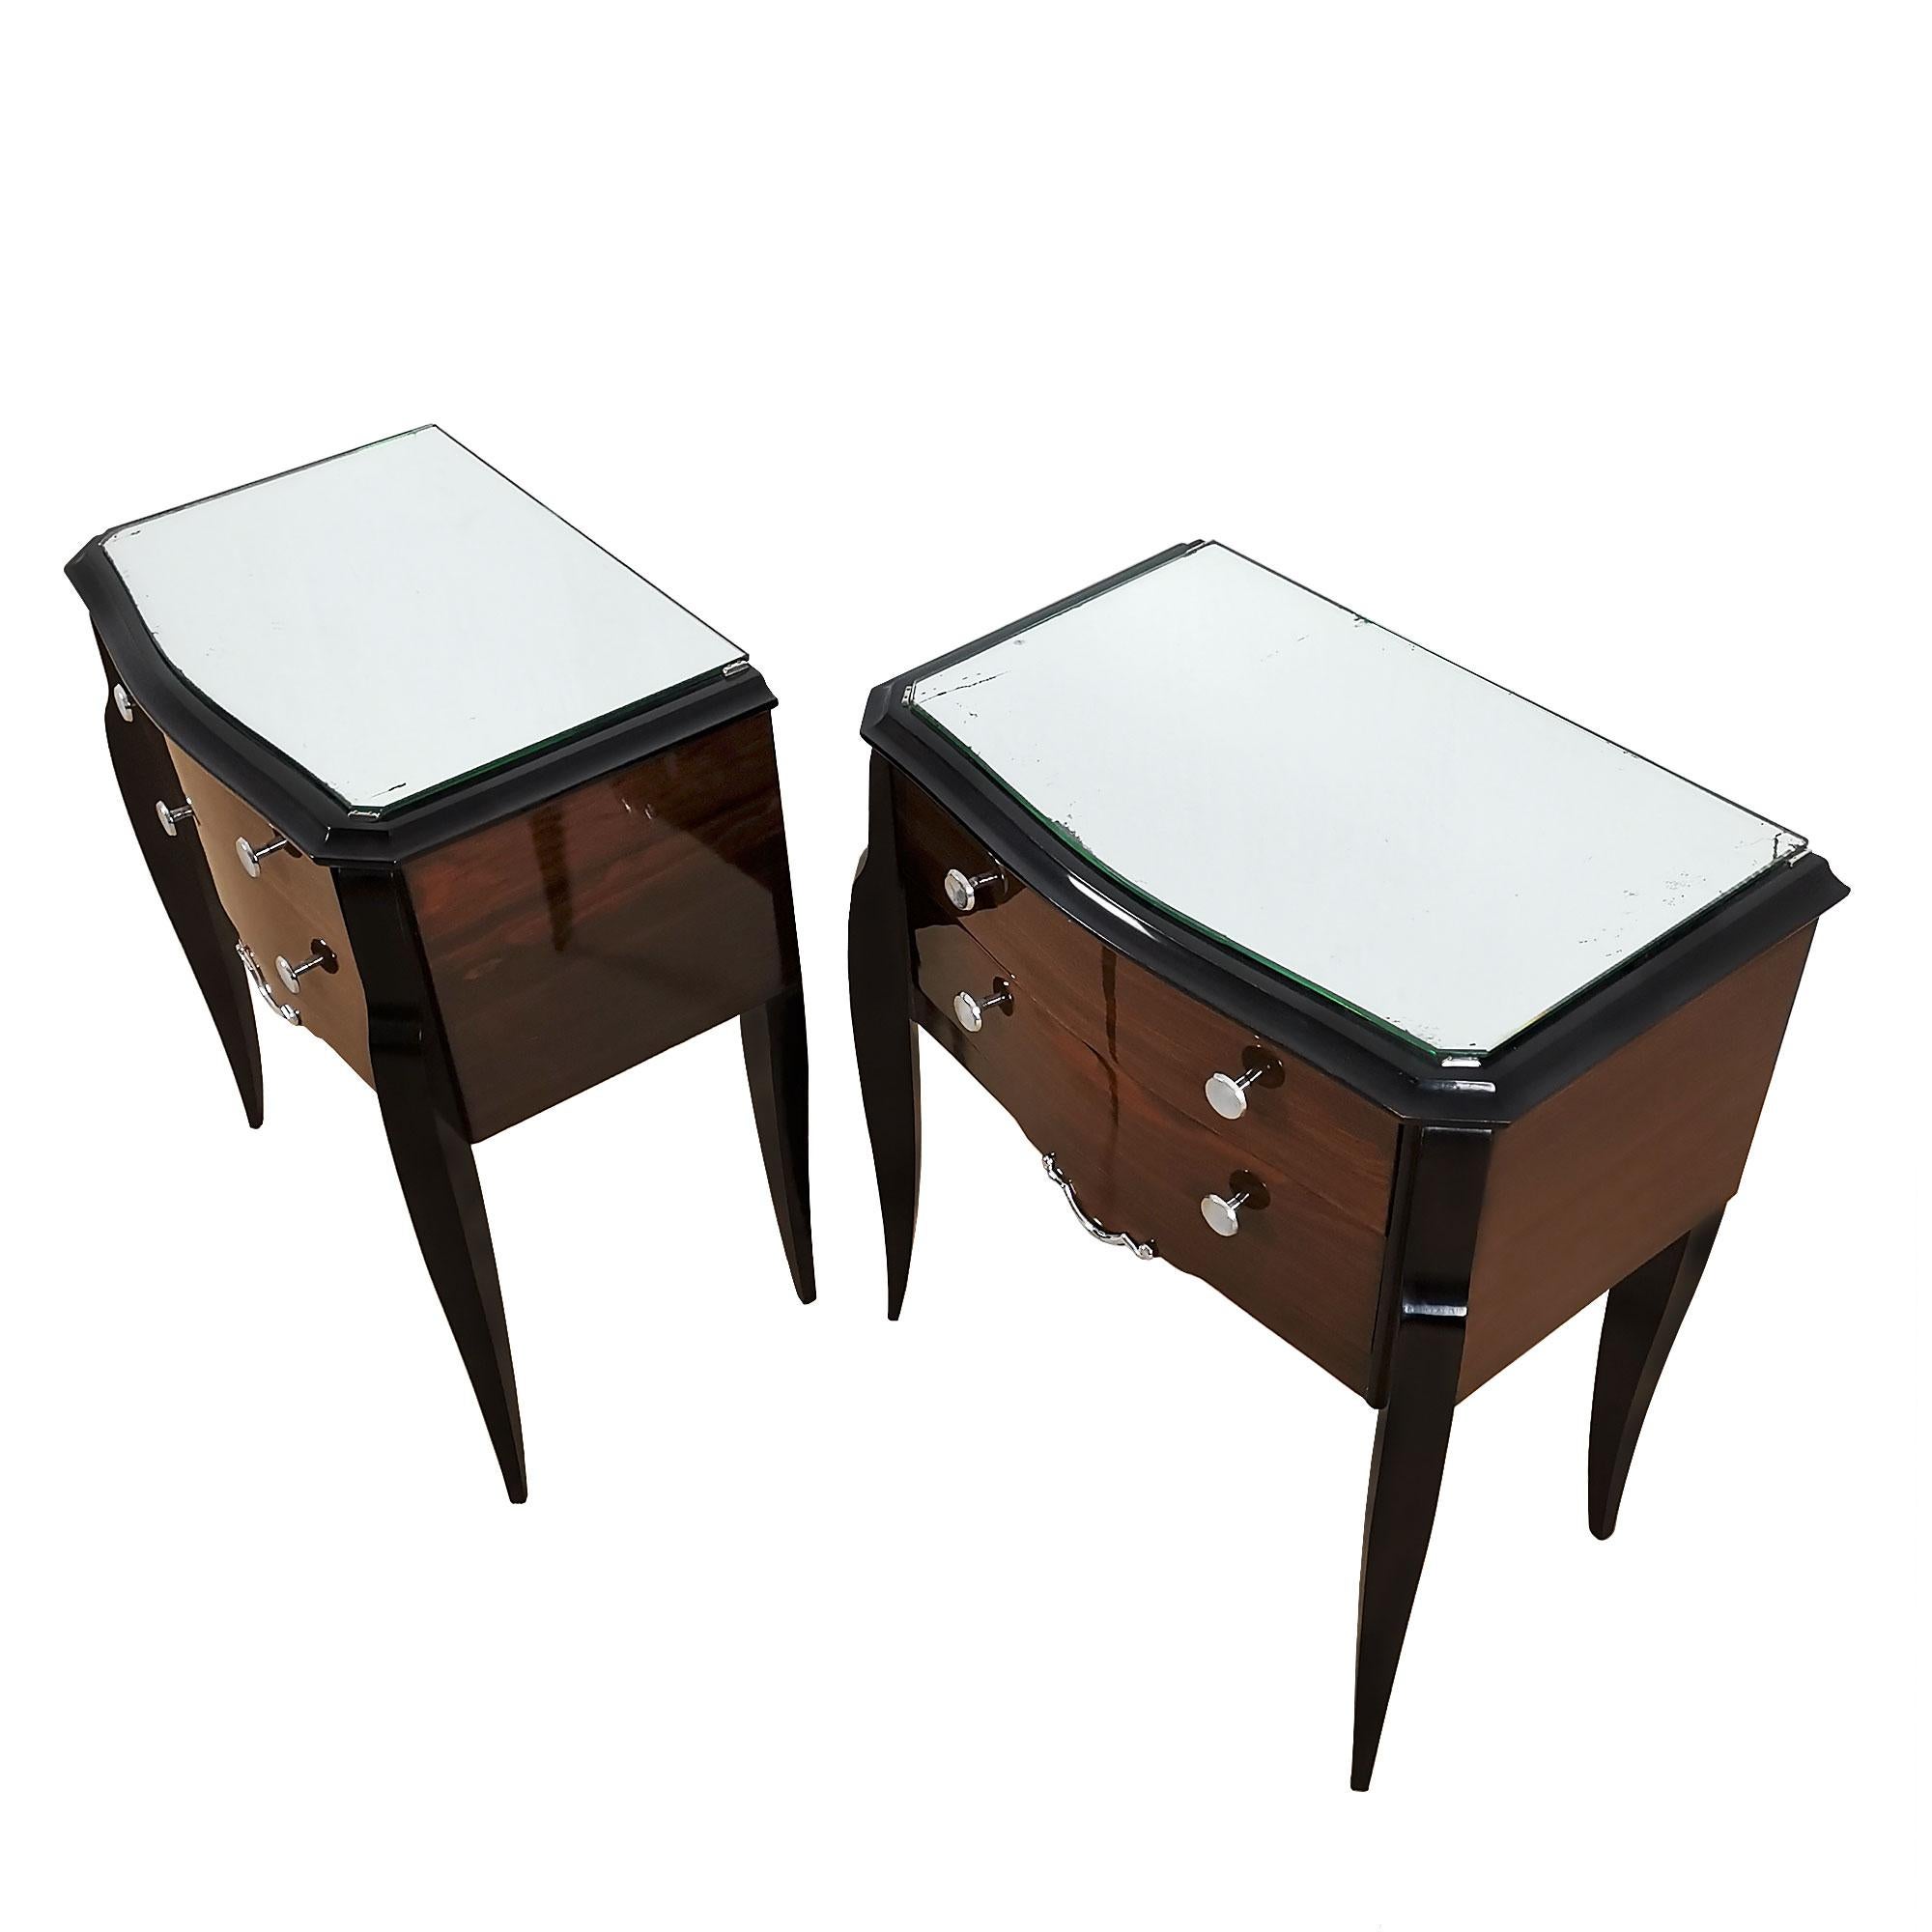 Pair of night stands with beech structure, stands and top black stained, mahogany veneer on sides and drawers, French polish. Original mirror on top (some oxidation).
France, c. 1940.